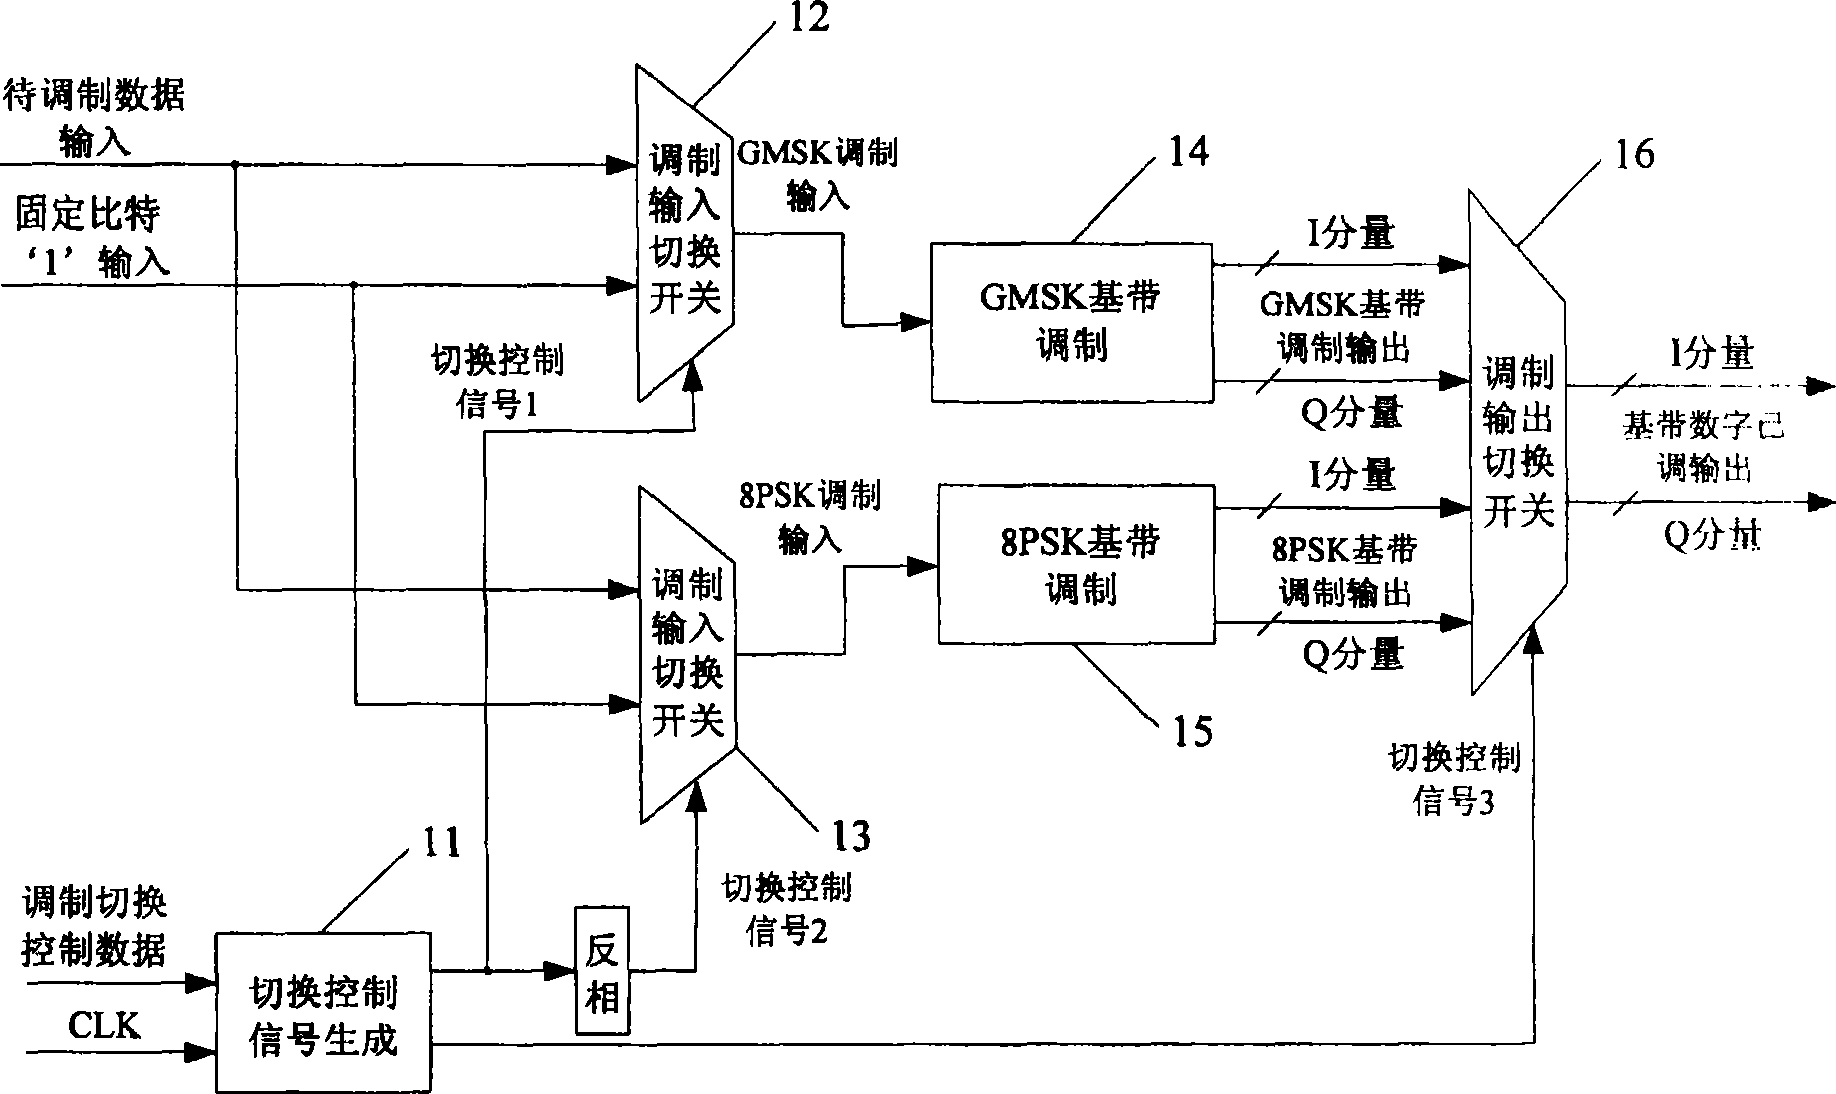 Modulation device and modulation realization method suitable for EDGE system